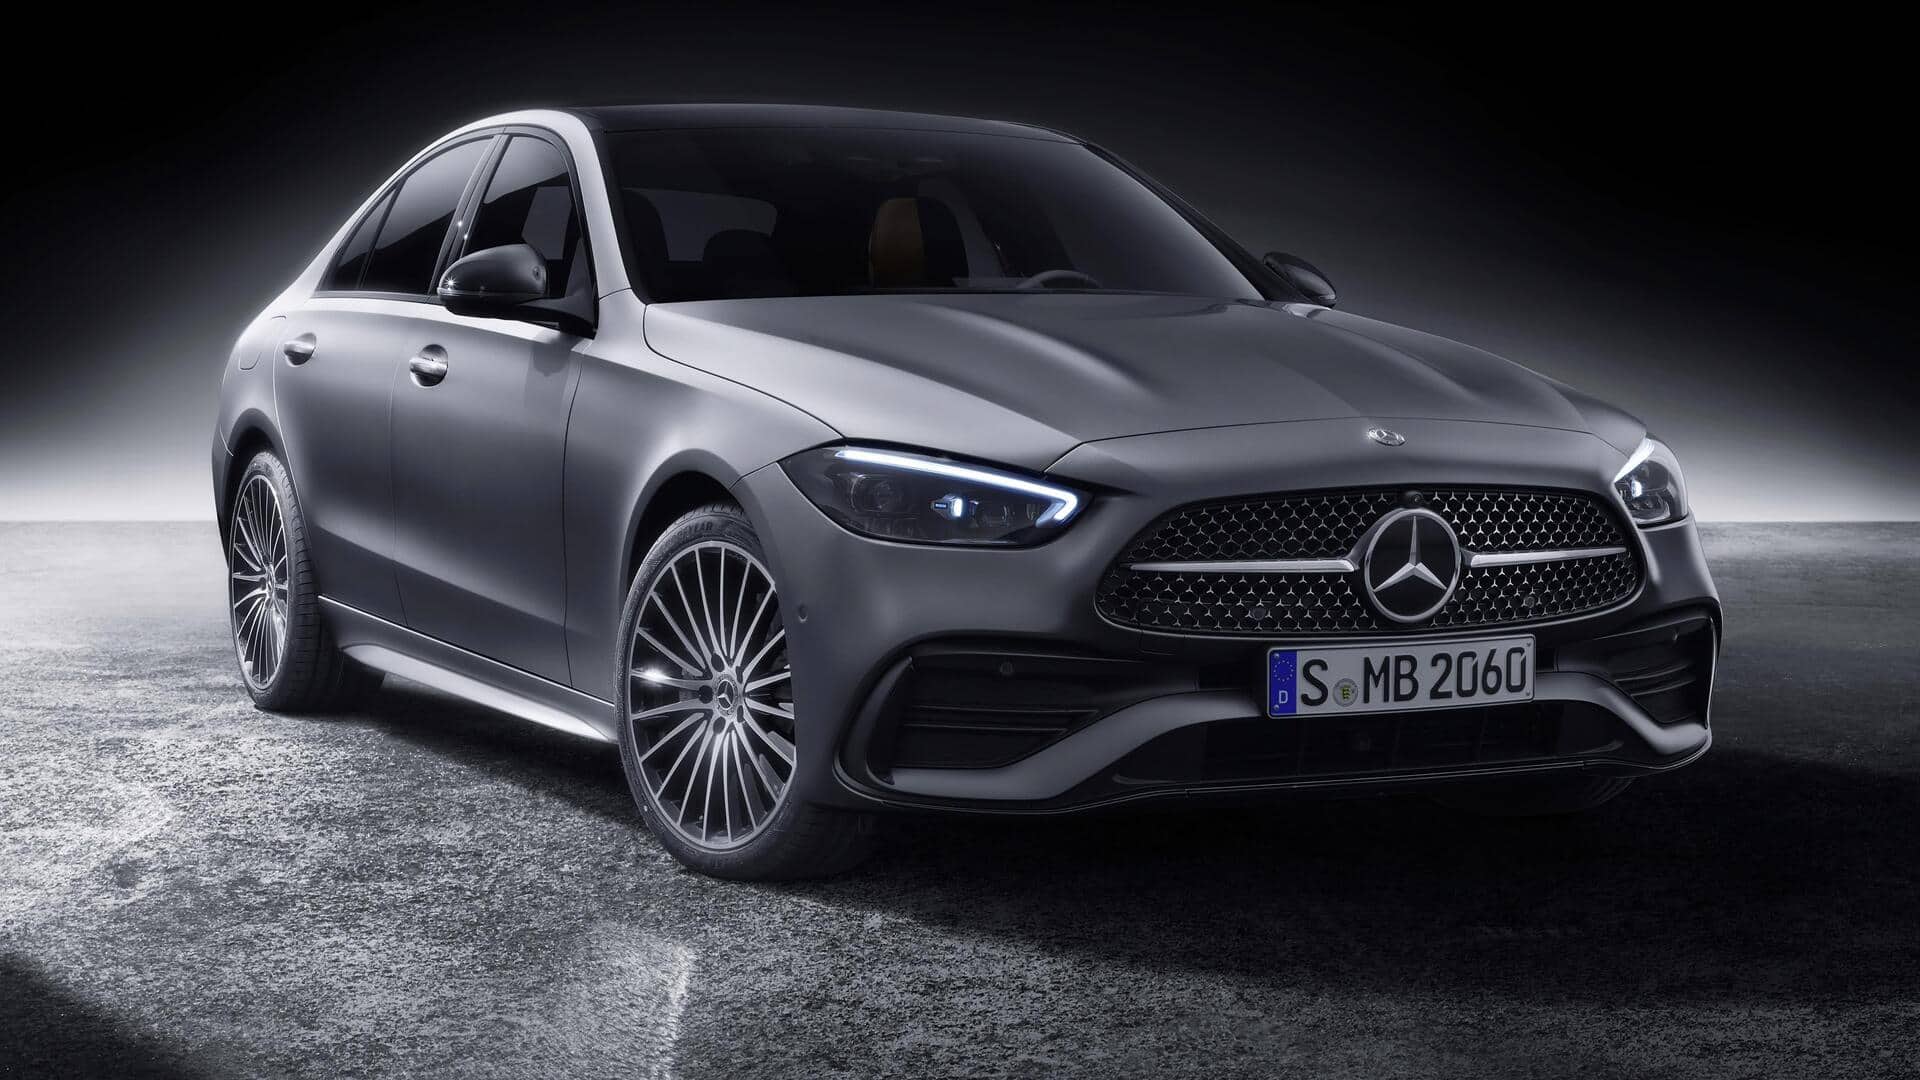 Mercedes-Benz C-Class EV in the works: What to expect